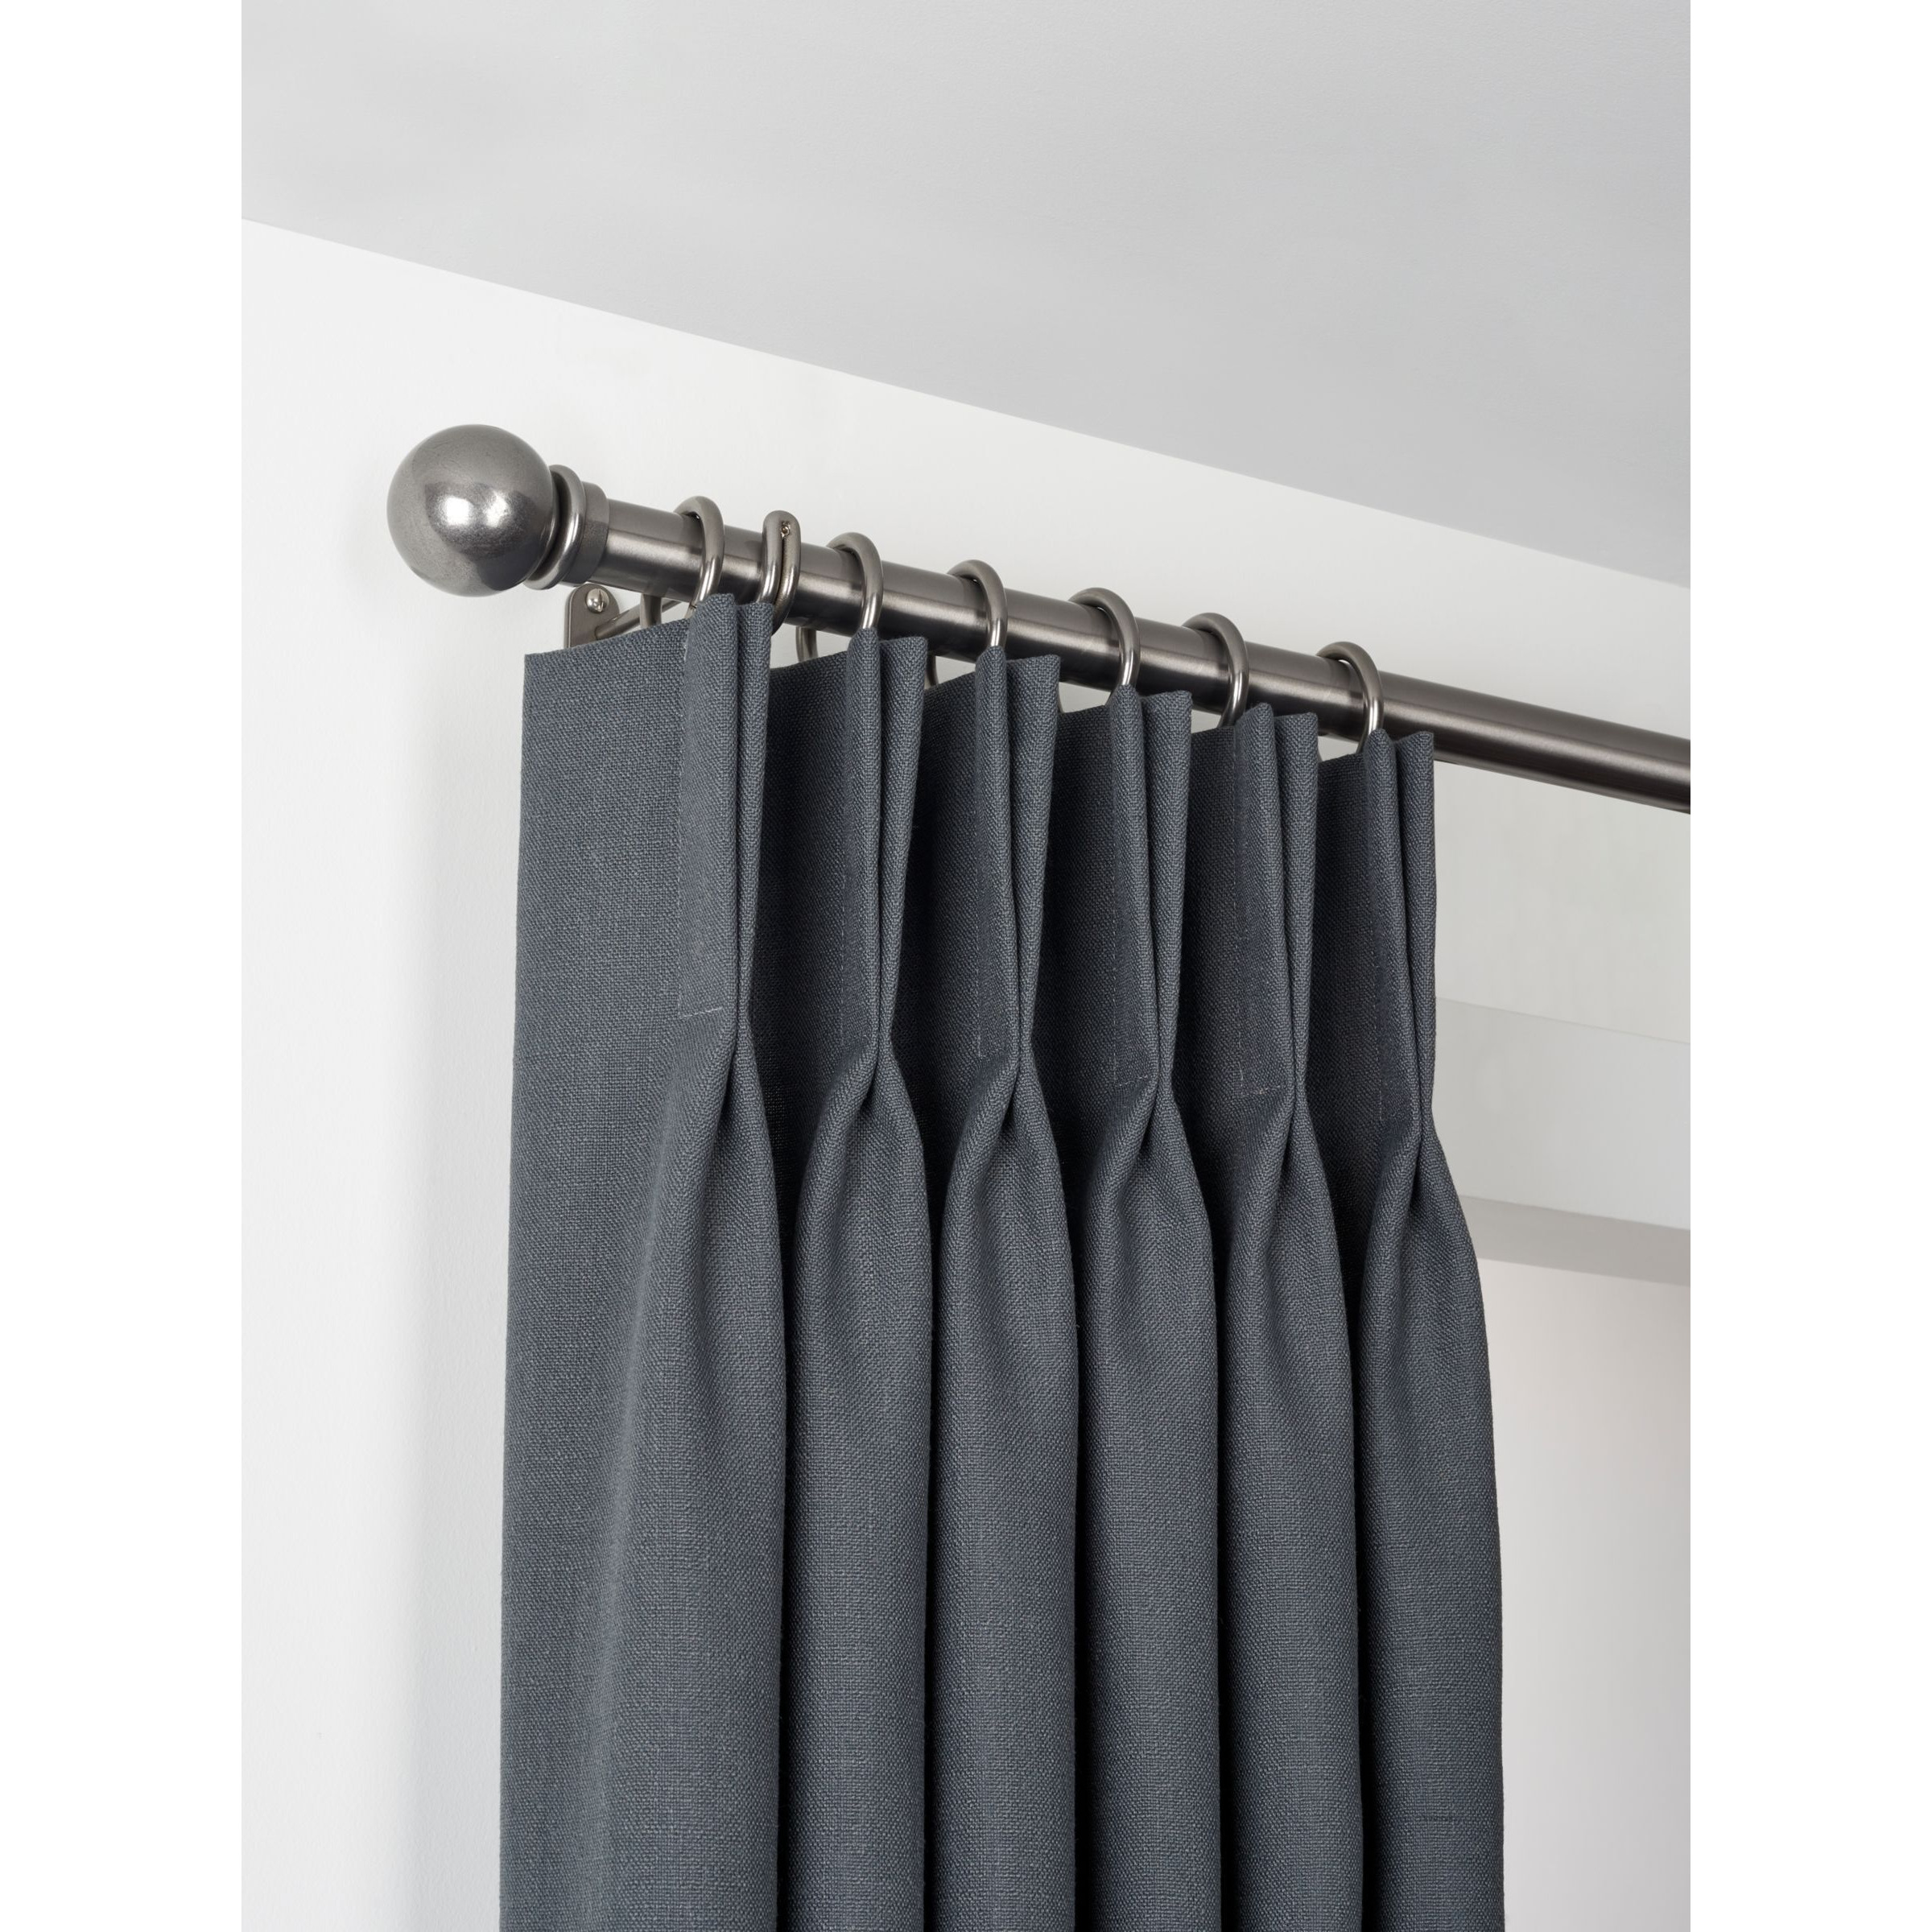 John Lewis Select Classic Curtain Pole with Rings and Ball Finial, Wall Fix, Dia.25mm - image 1